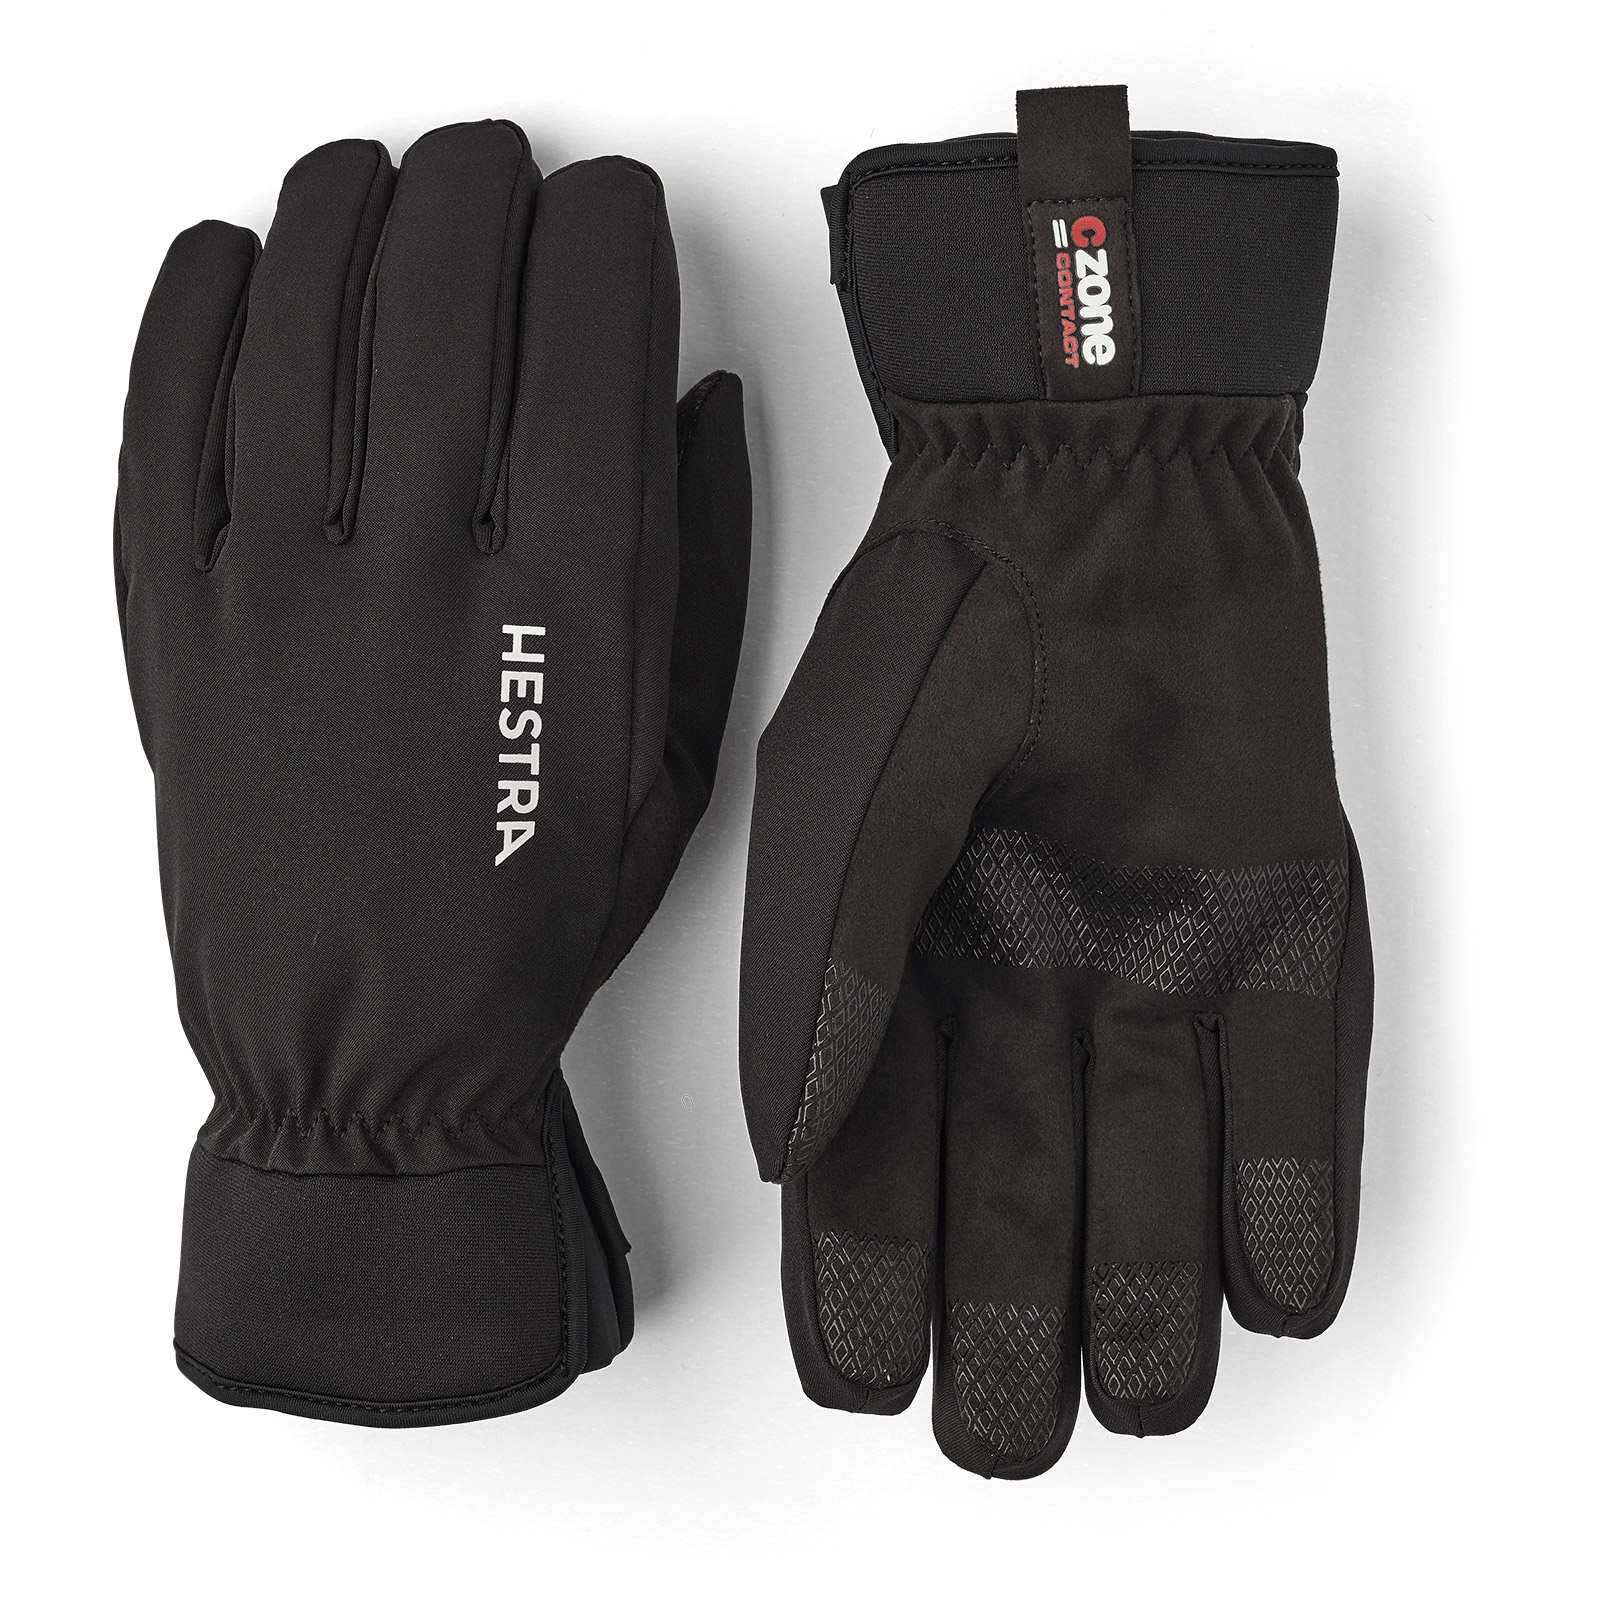 Hestra CZone Contact Glove - 5 Finger